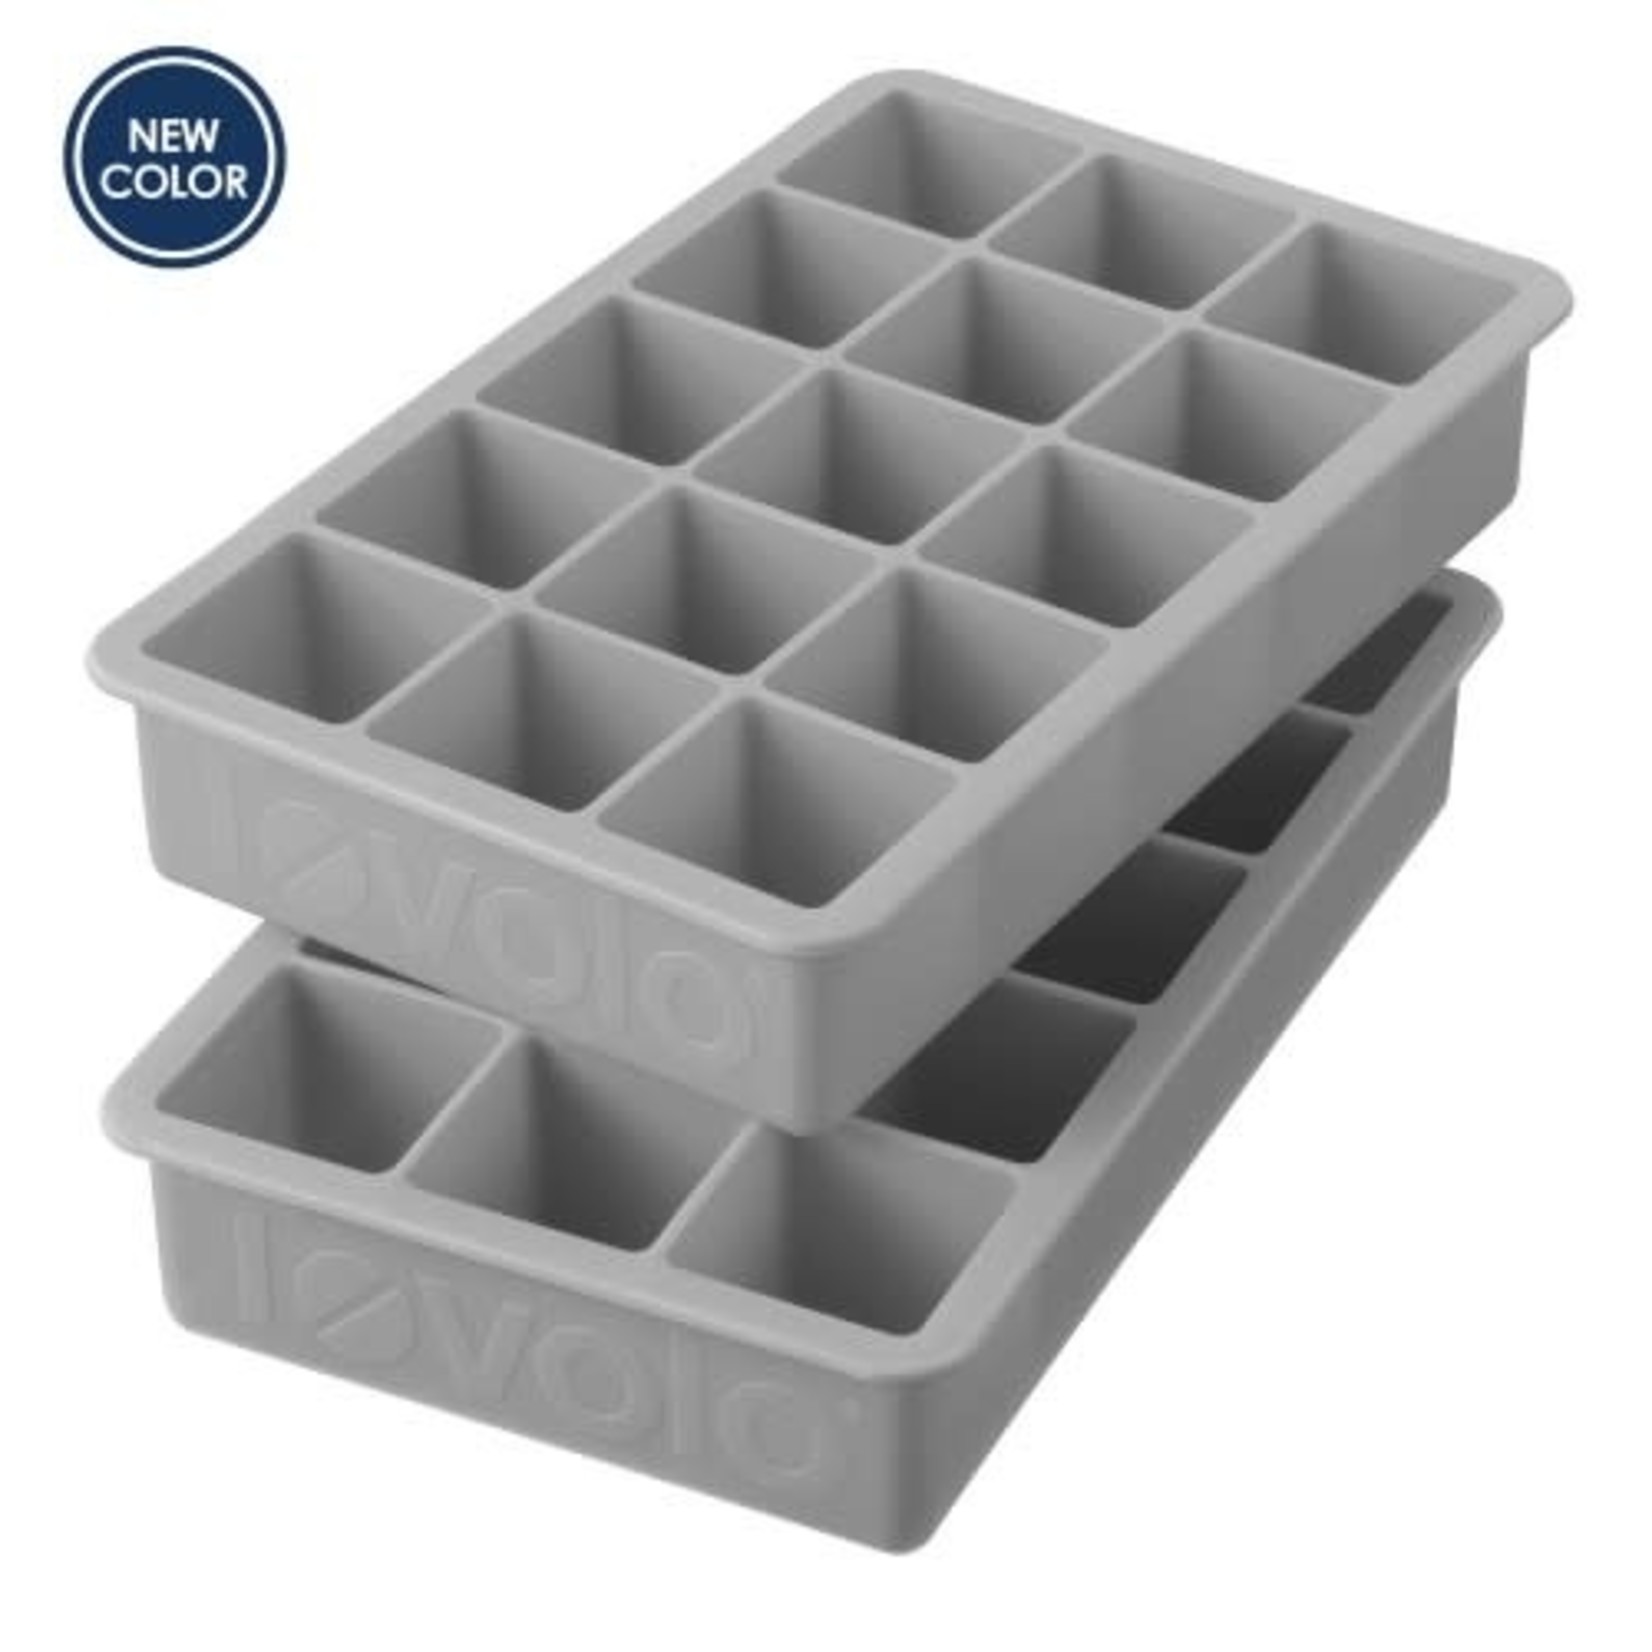 TOVOLO TOVOLO Perfect Ice Cube Trays S/2 - Oyster